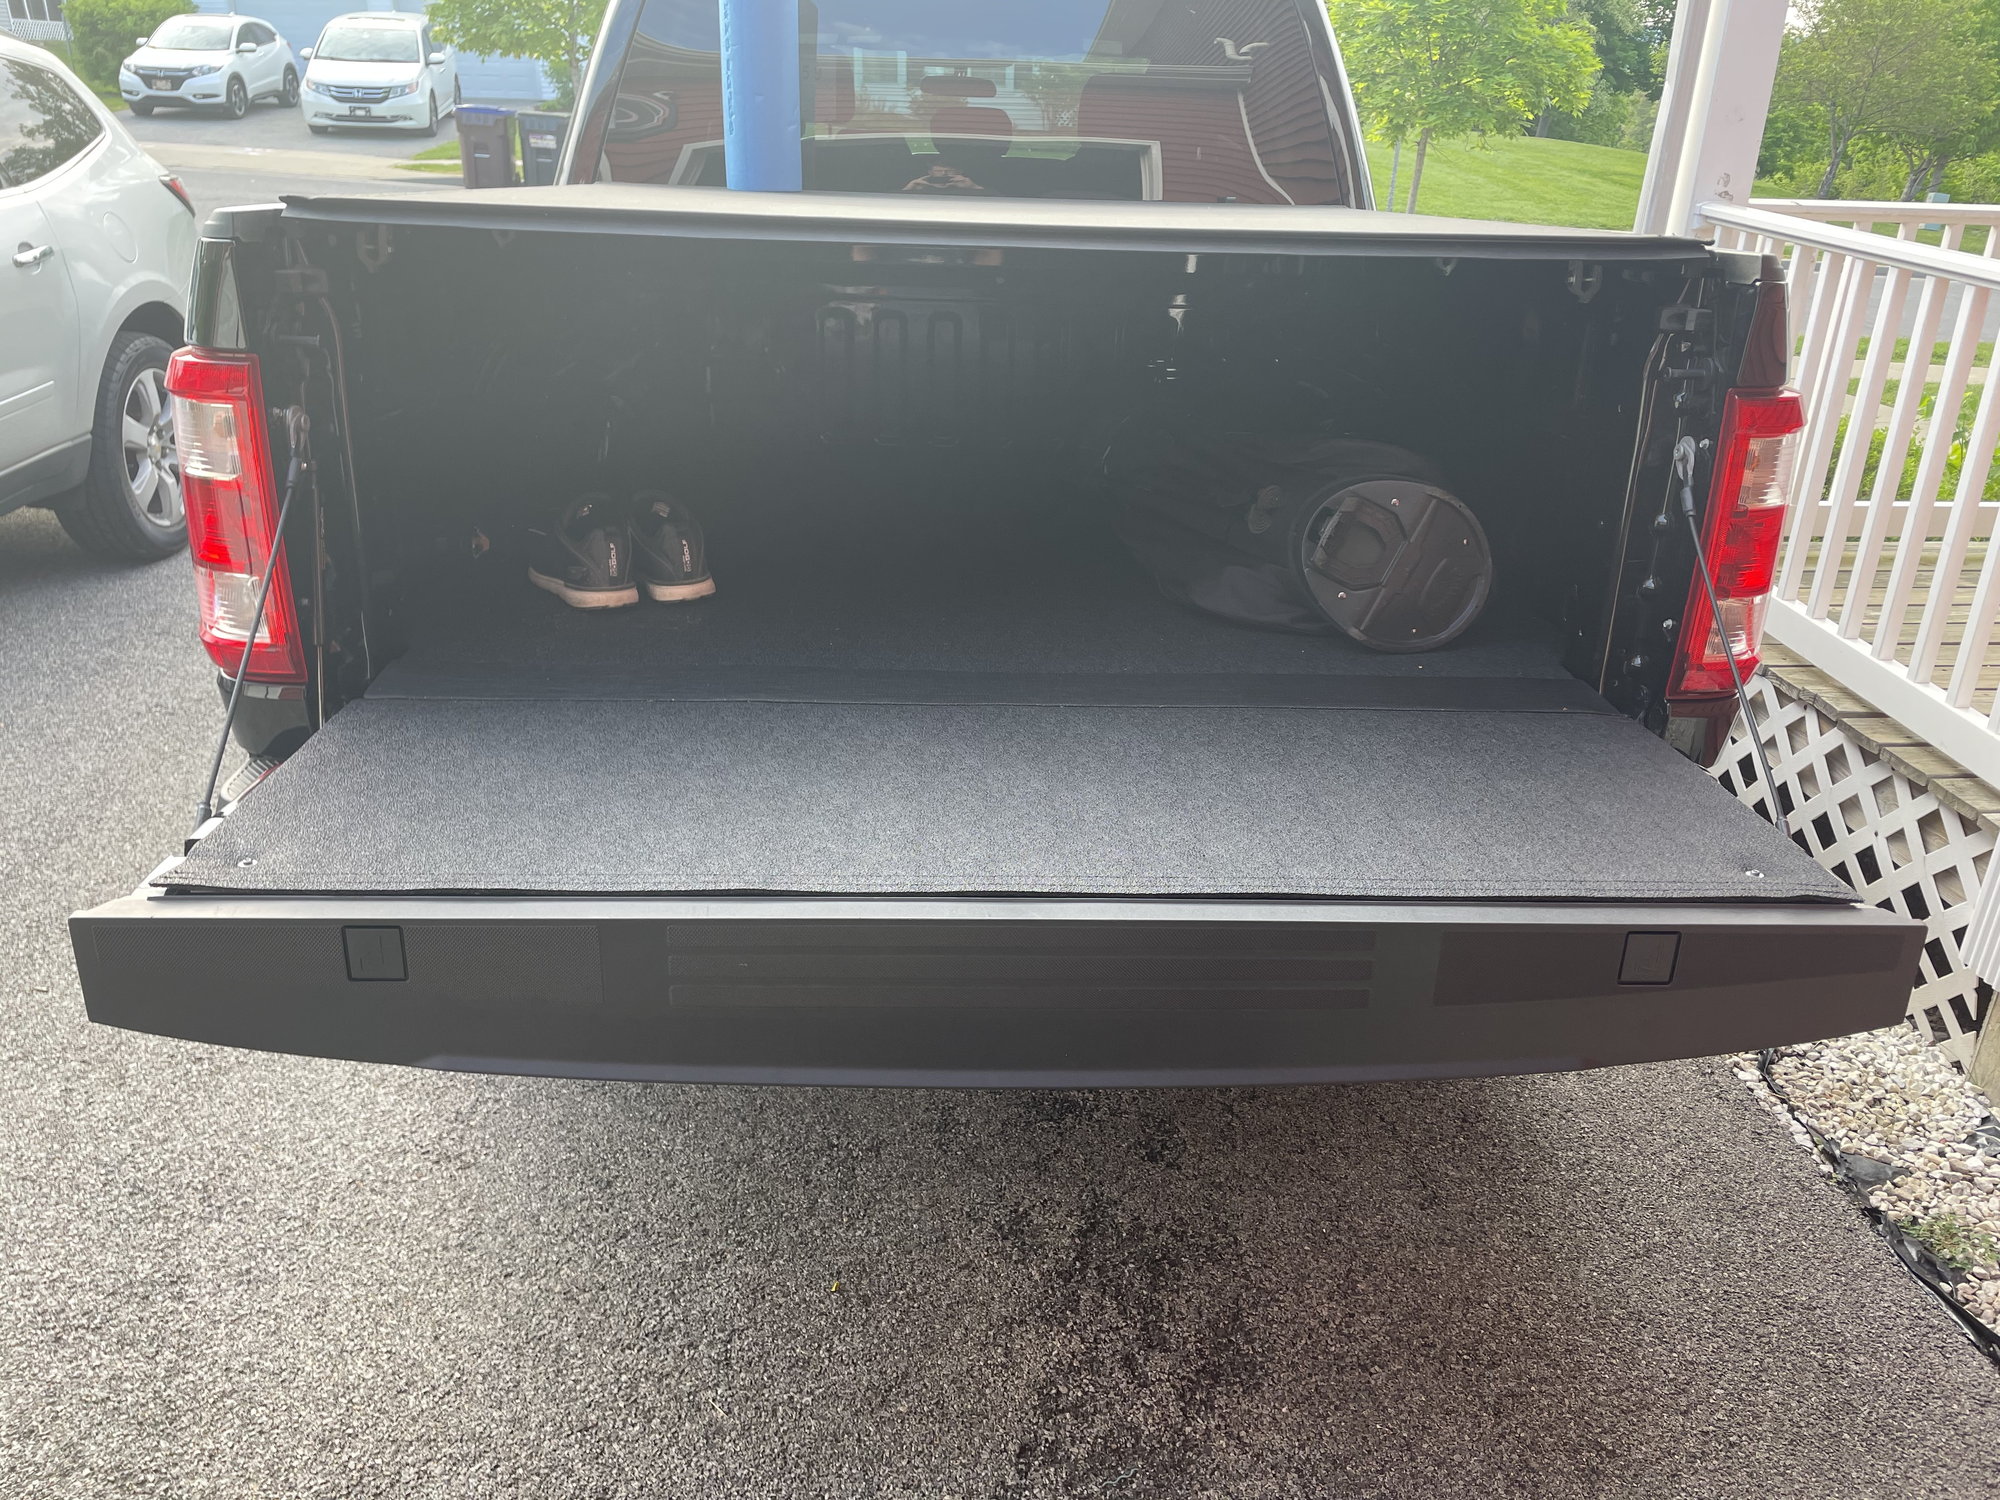 Tailgate Damper - Ford F150 Forum - Community of Ford Truck Fans